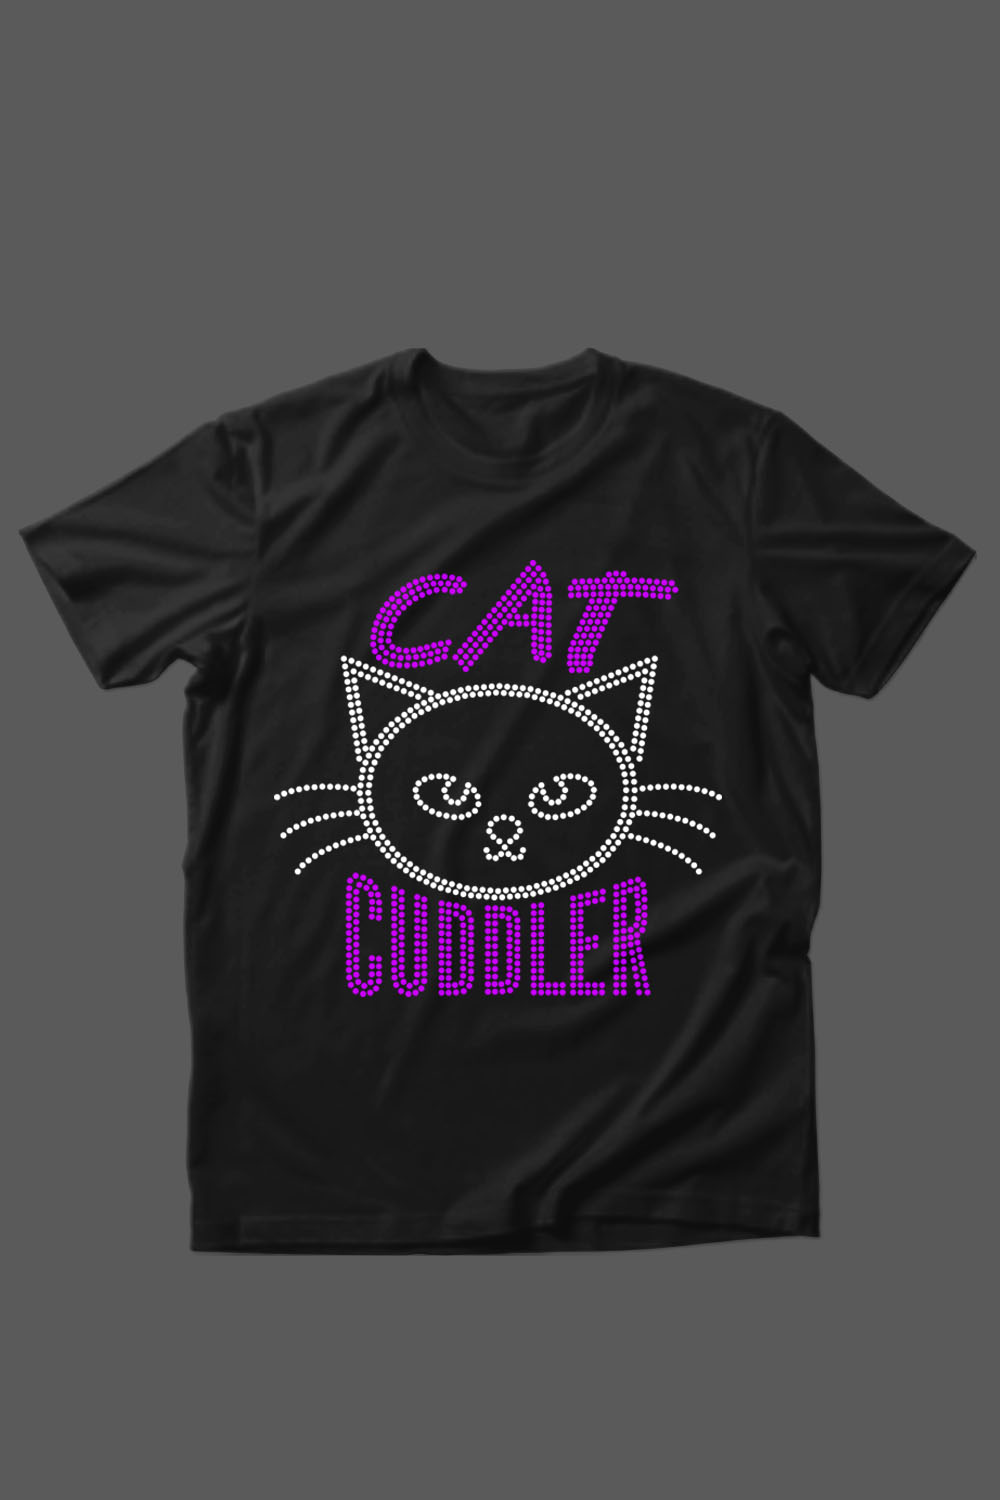 Image of a black t-shirt with an irresistible Cat Cuddler slogan